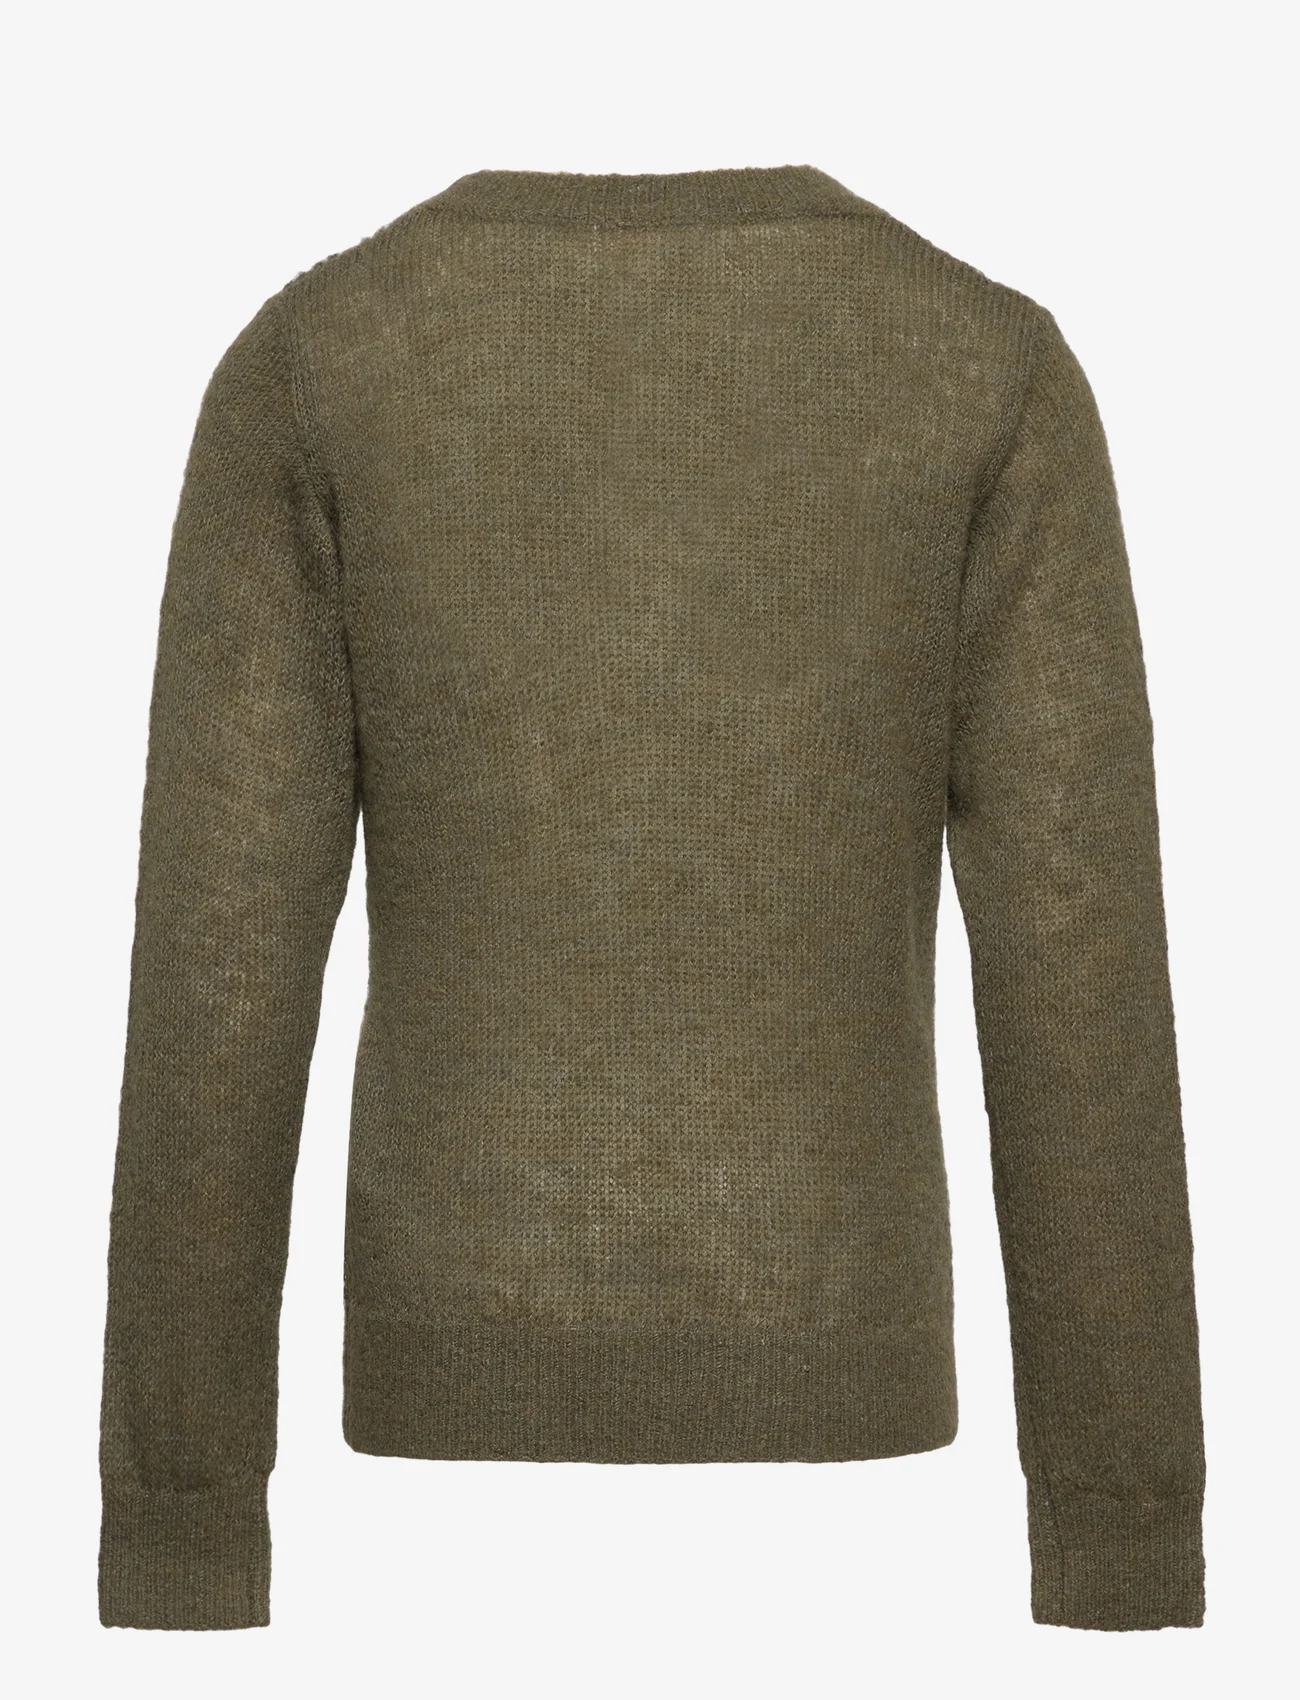 Creamie - Pullover Knit - pullover - olive night - 1